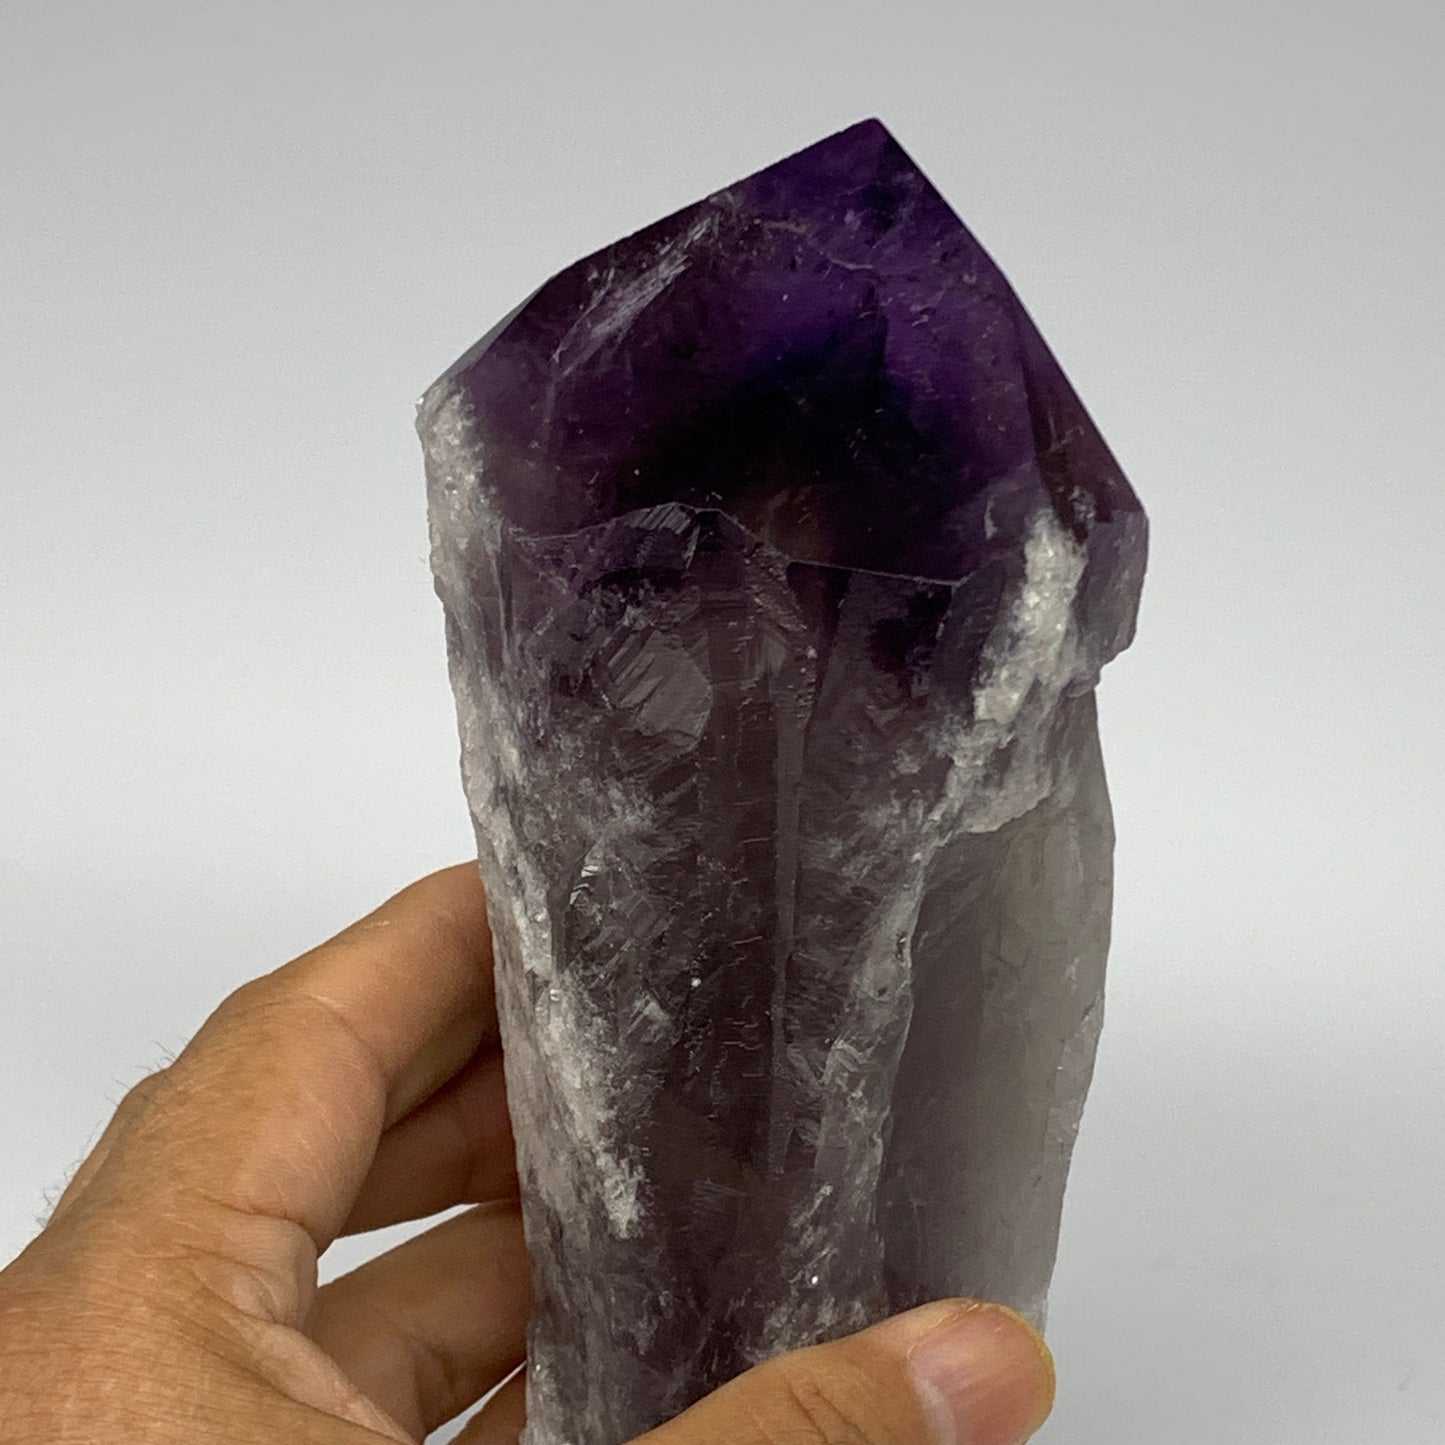 630g,7.4"x2.6"x1.9",Amethyst Point Polished Rough lower part from Brazil,B19093